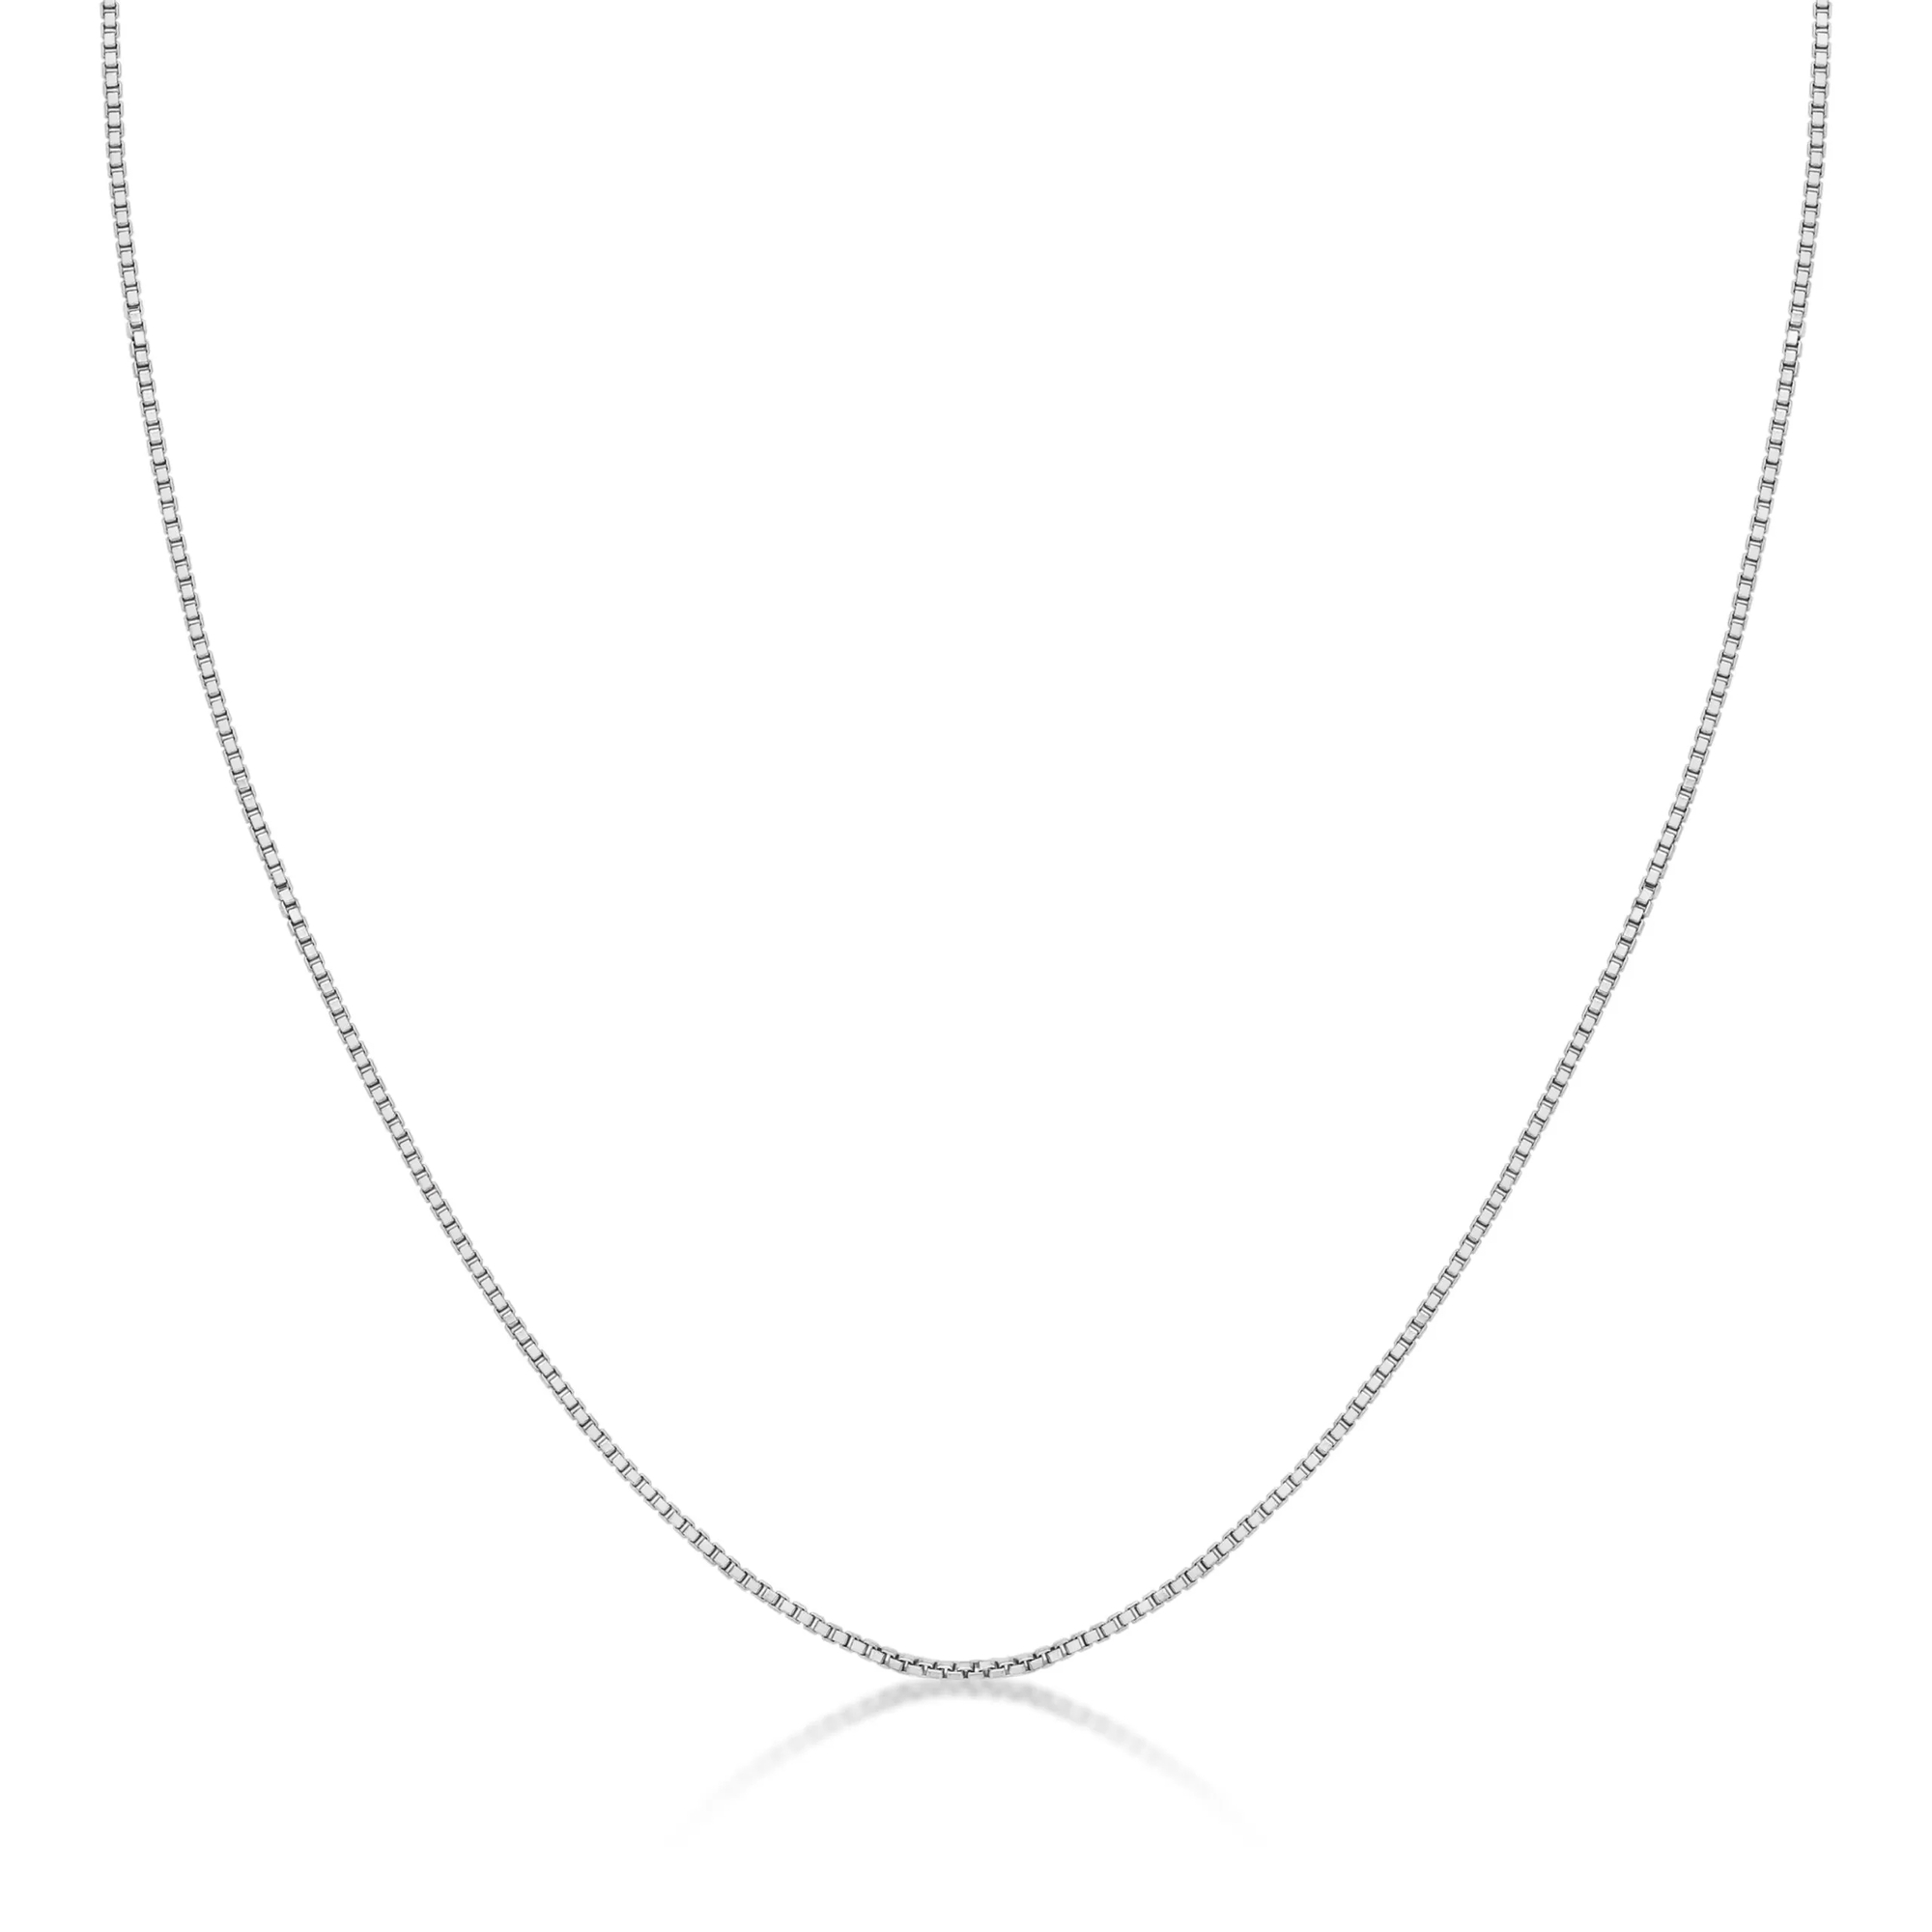 Women's Replacement Chain with Spring Ring Clasp, 925 Sterling Silver, 0.6 MM Box Chain, 18 Inch | Lavari Jewelers